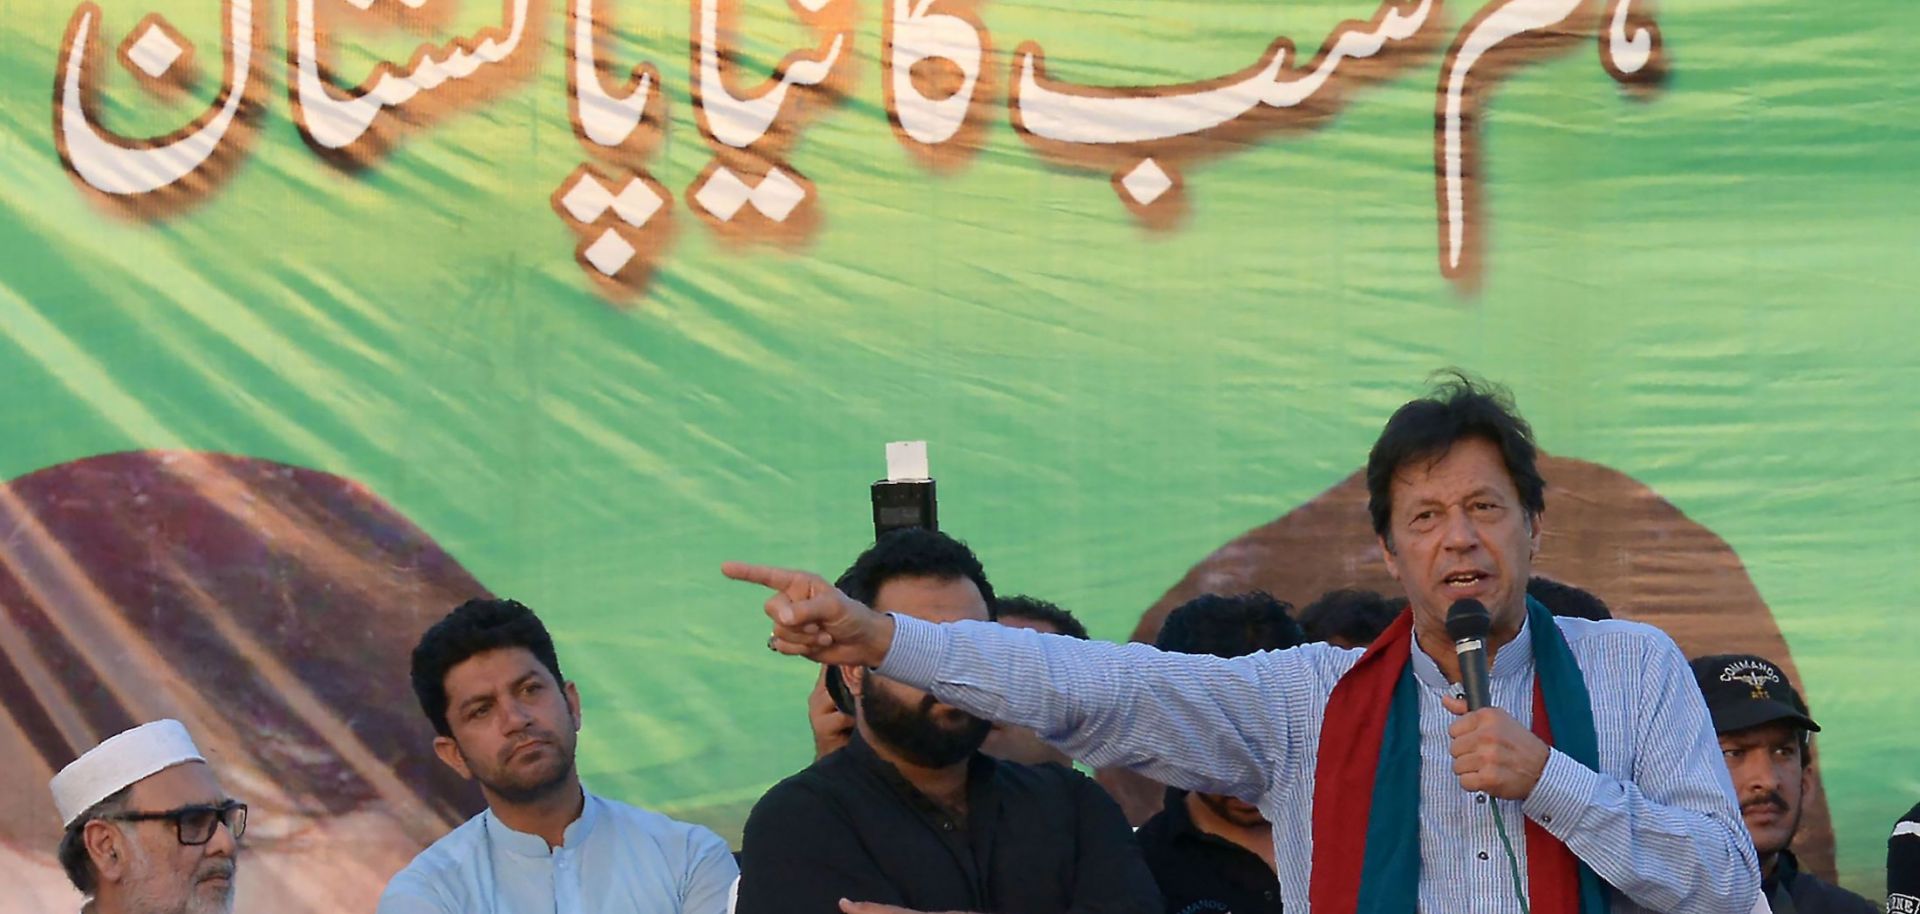 Imran Khan's Pakistan Tahrik-e-Insaf party is among the three major contenders trying to win Pakistan's general elections on July 25.